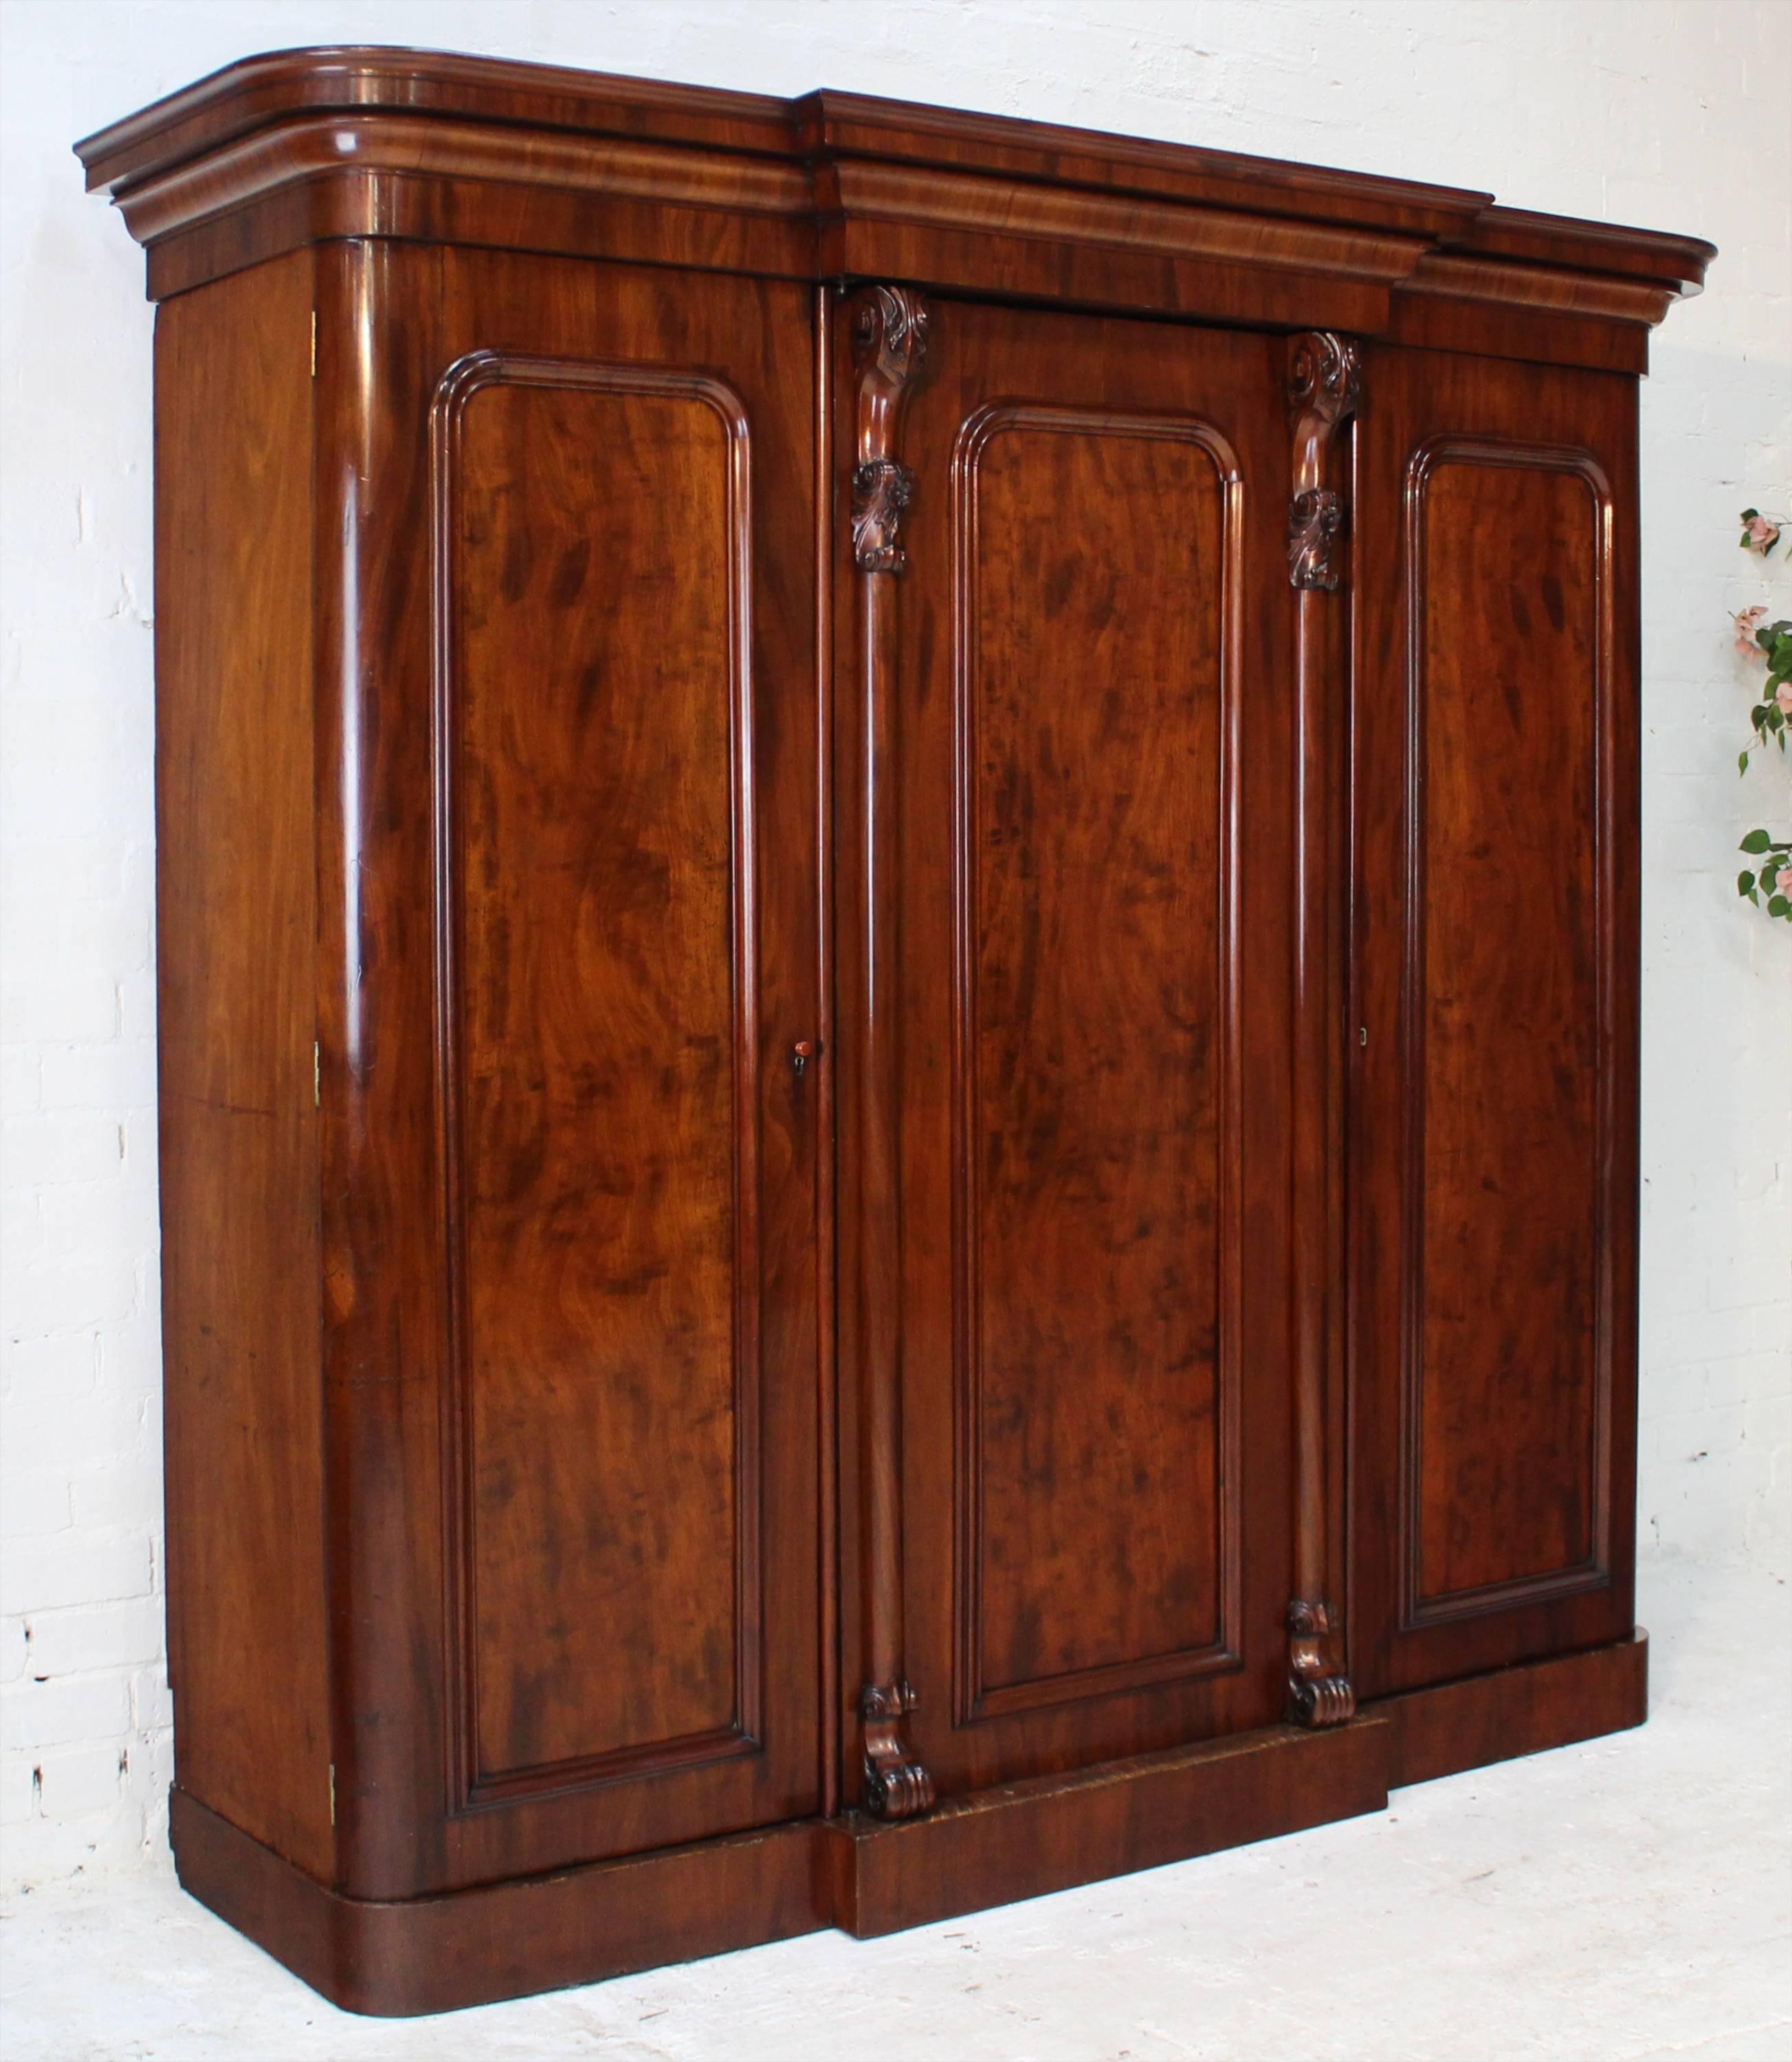 A fabulous Victorian breakfront wardrobe of super quality and dating to circa 1860. Featuring richly colored well figured mahogany and crisply carved floral and acanthus leaf carved corbels and columns flanking the central door.

With a moulded